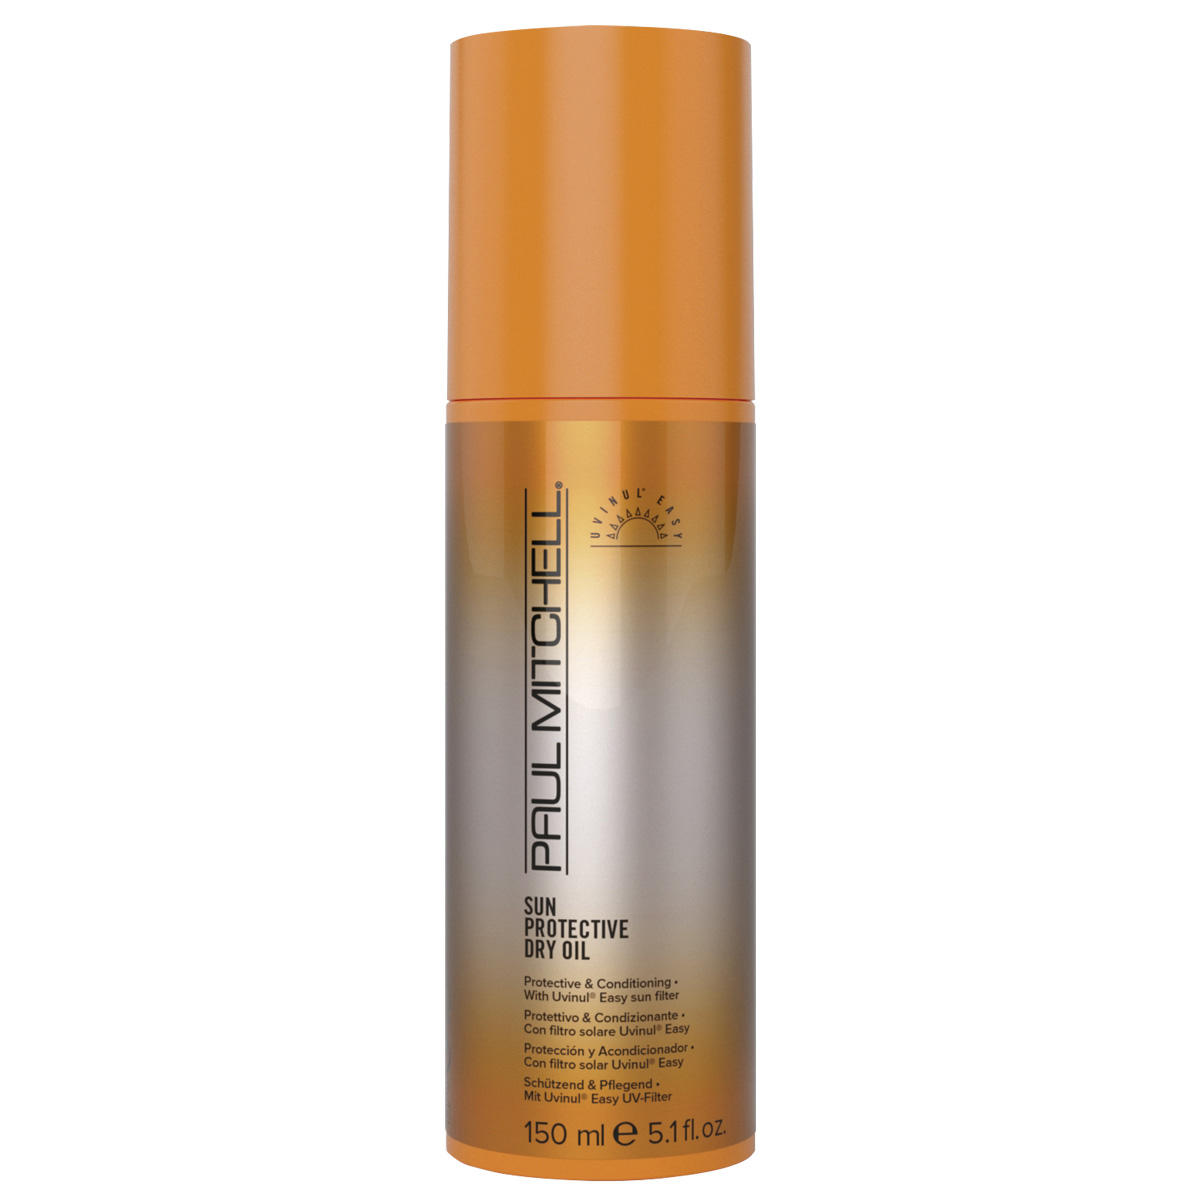 Paul Mitchell Sun Protective Dry Oil Limited Edition 150 ml